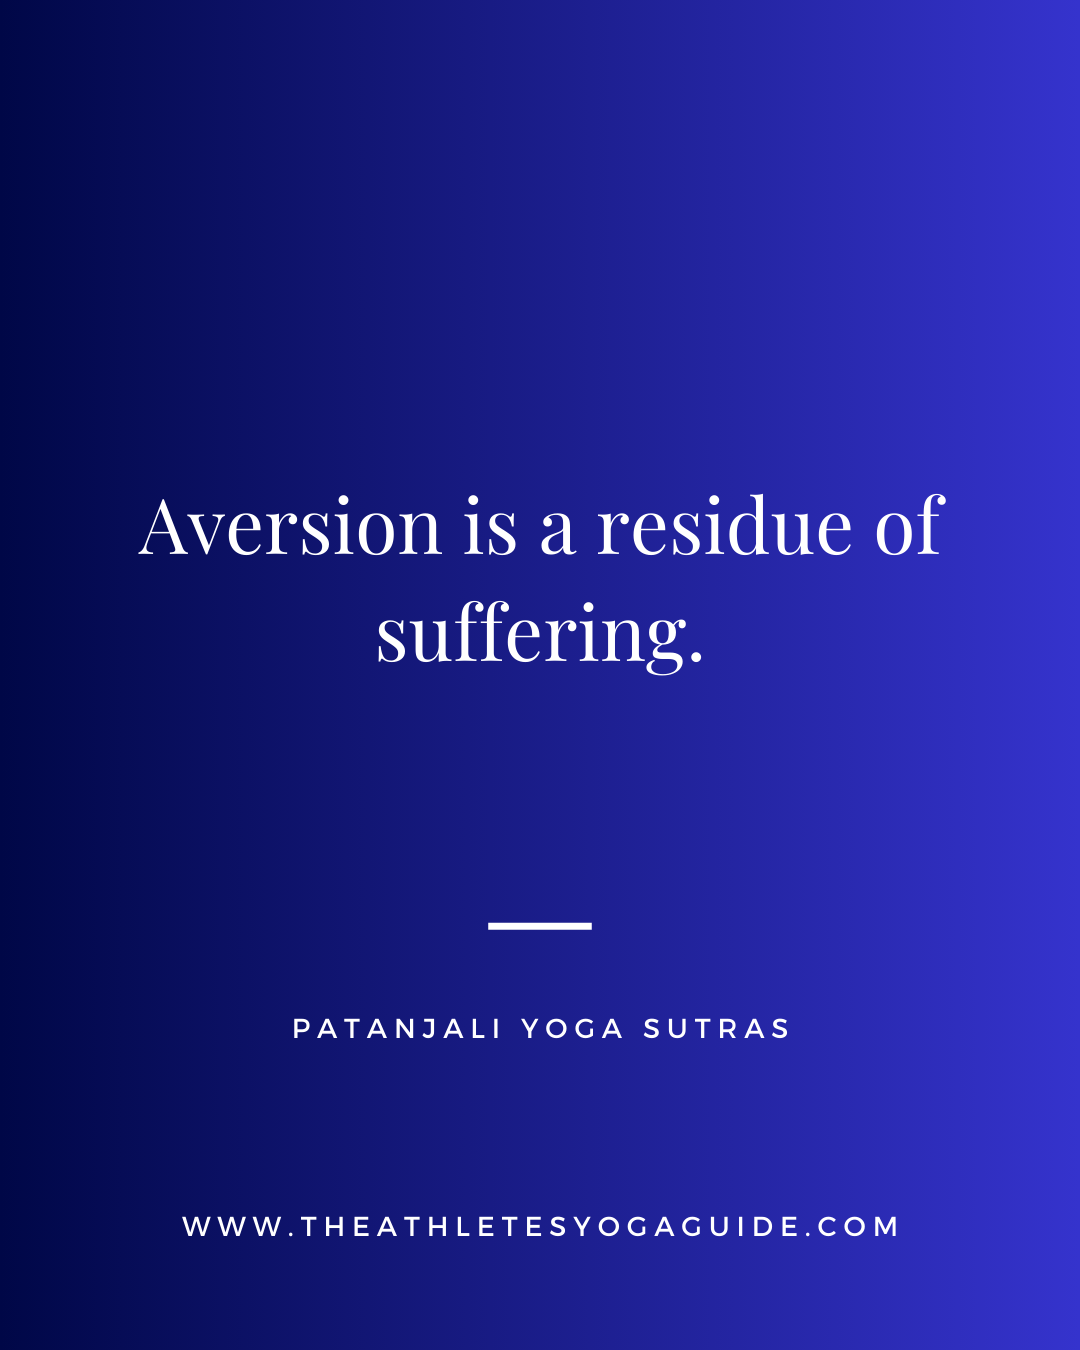 Aversion is a Residue of Suffering: Patanjali Yoga Sutras